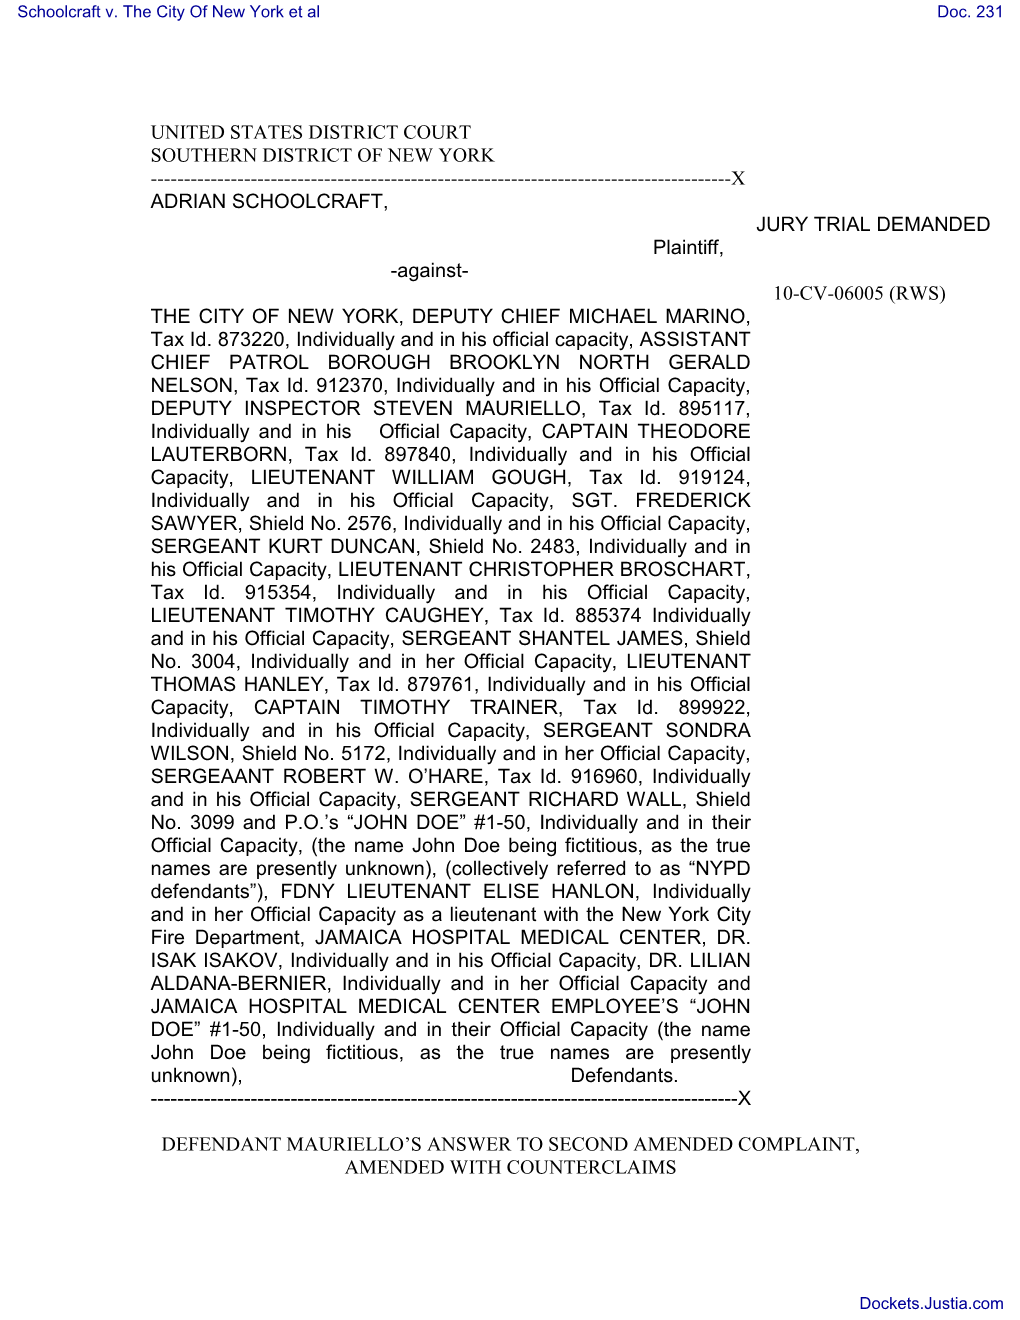 COUNTERCLAIM Against Adrian Schoolcraft.Document Filed By